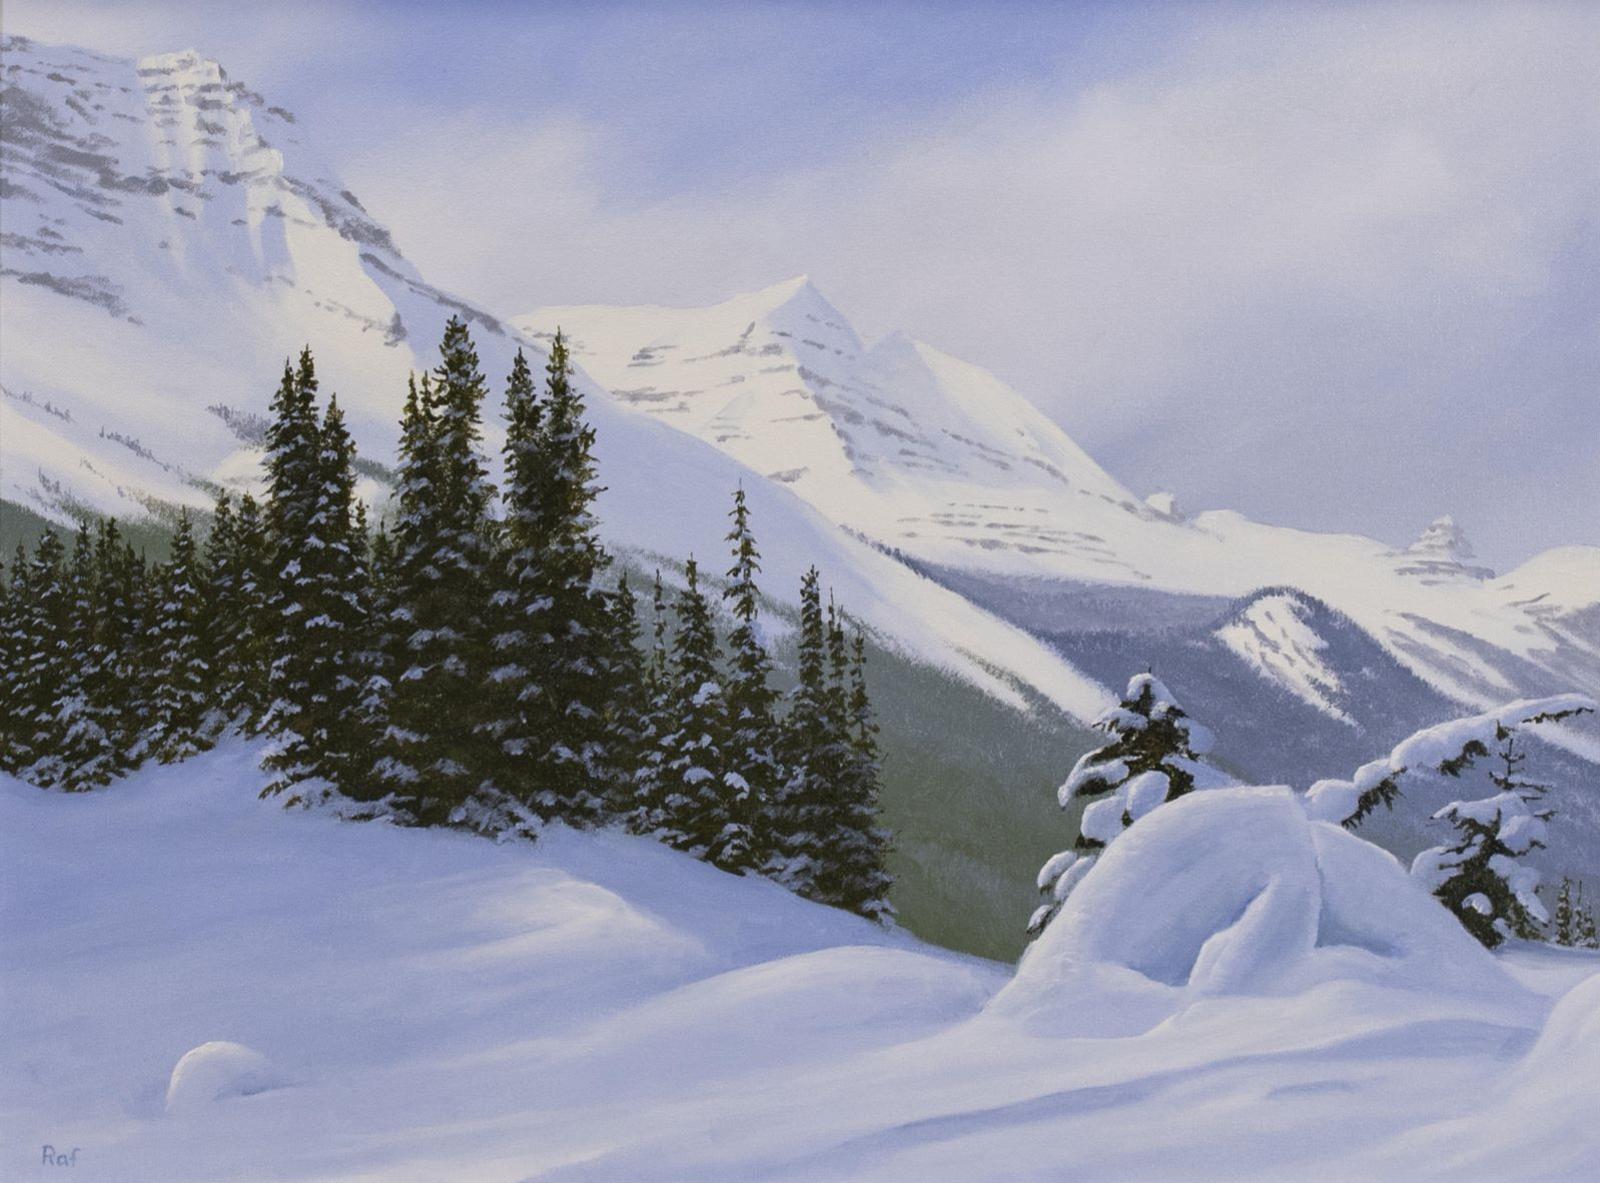 Ted Raftery (1938) - Above Yoho Valley